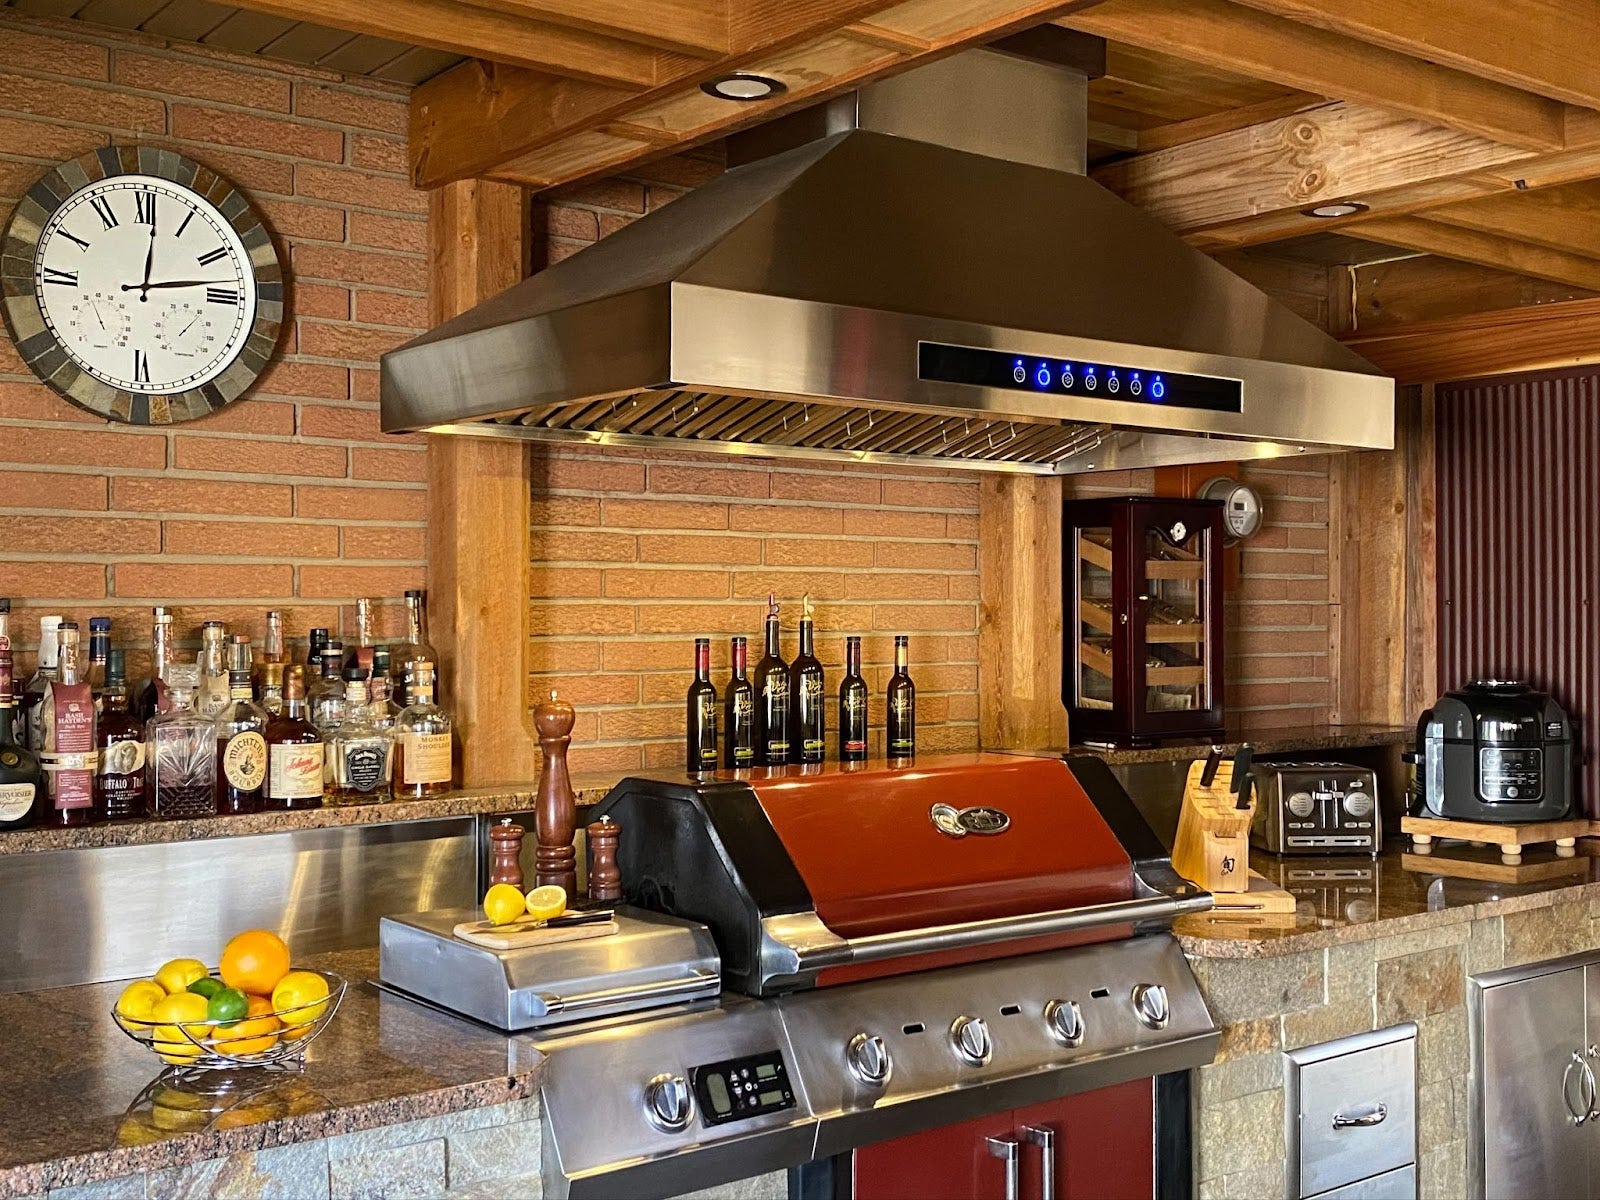 Home kitchen bar setup with a prominent stainless steel range hood above a red grill, complemented by a diverse alcohol selection. - Proline Range Hoods - prolinerangehoods.com 